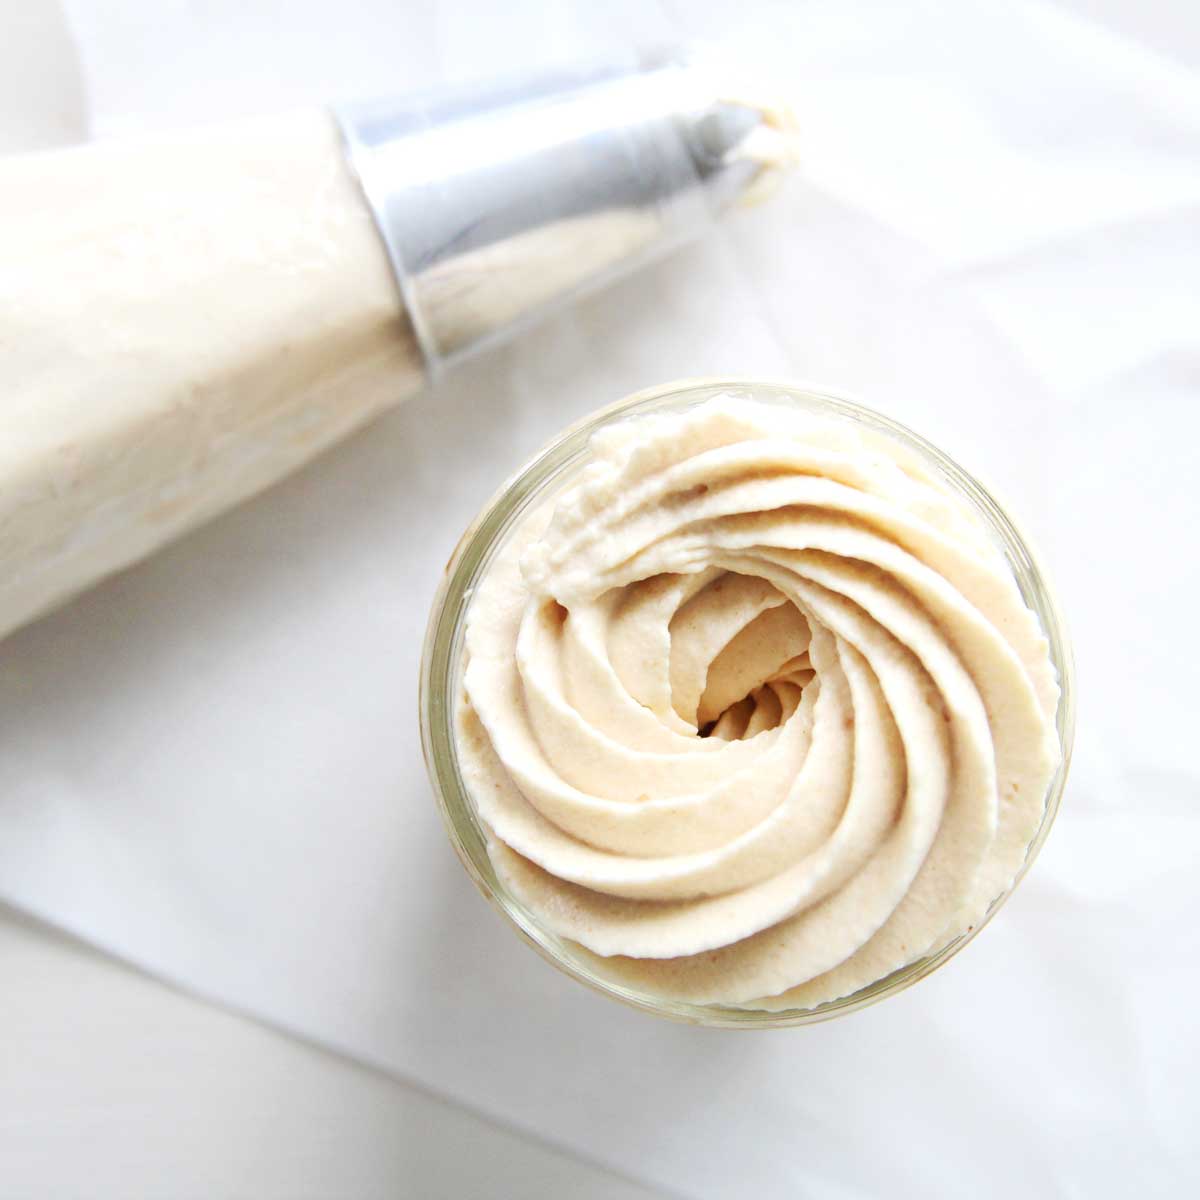 Peanut Butter Whipped Cream Recipe That Tastes Like Reeses Desserts - Peanut Butter Whipped Cream